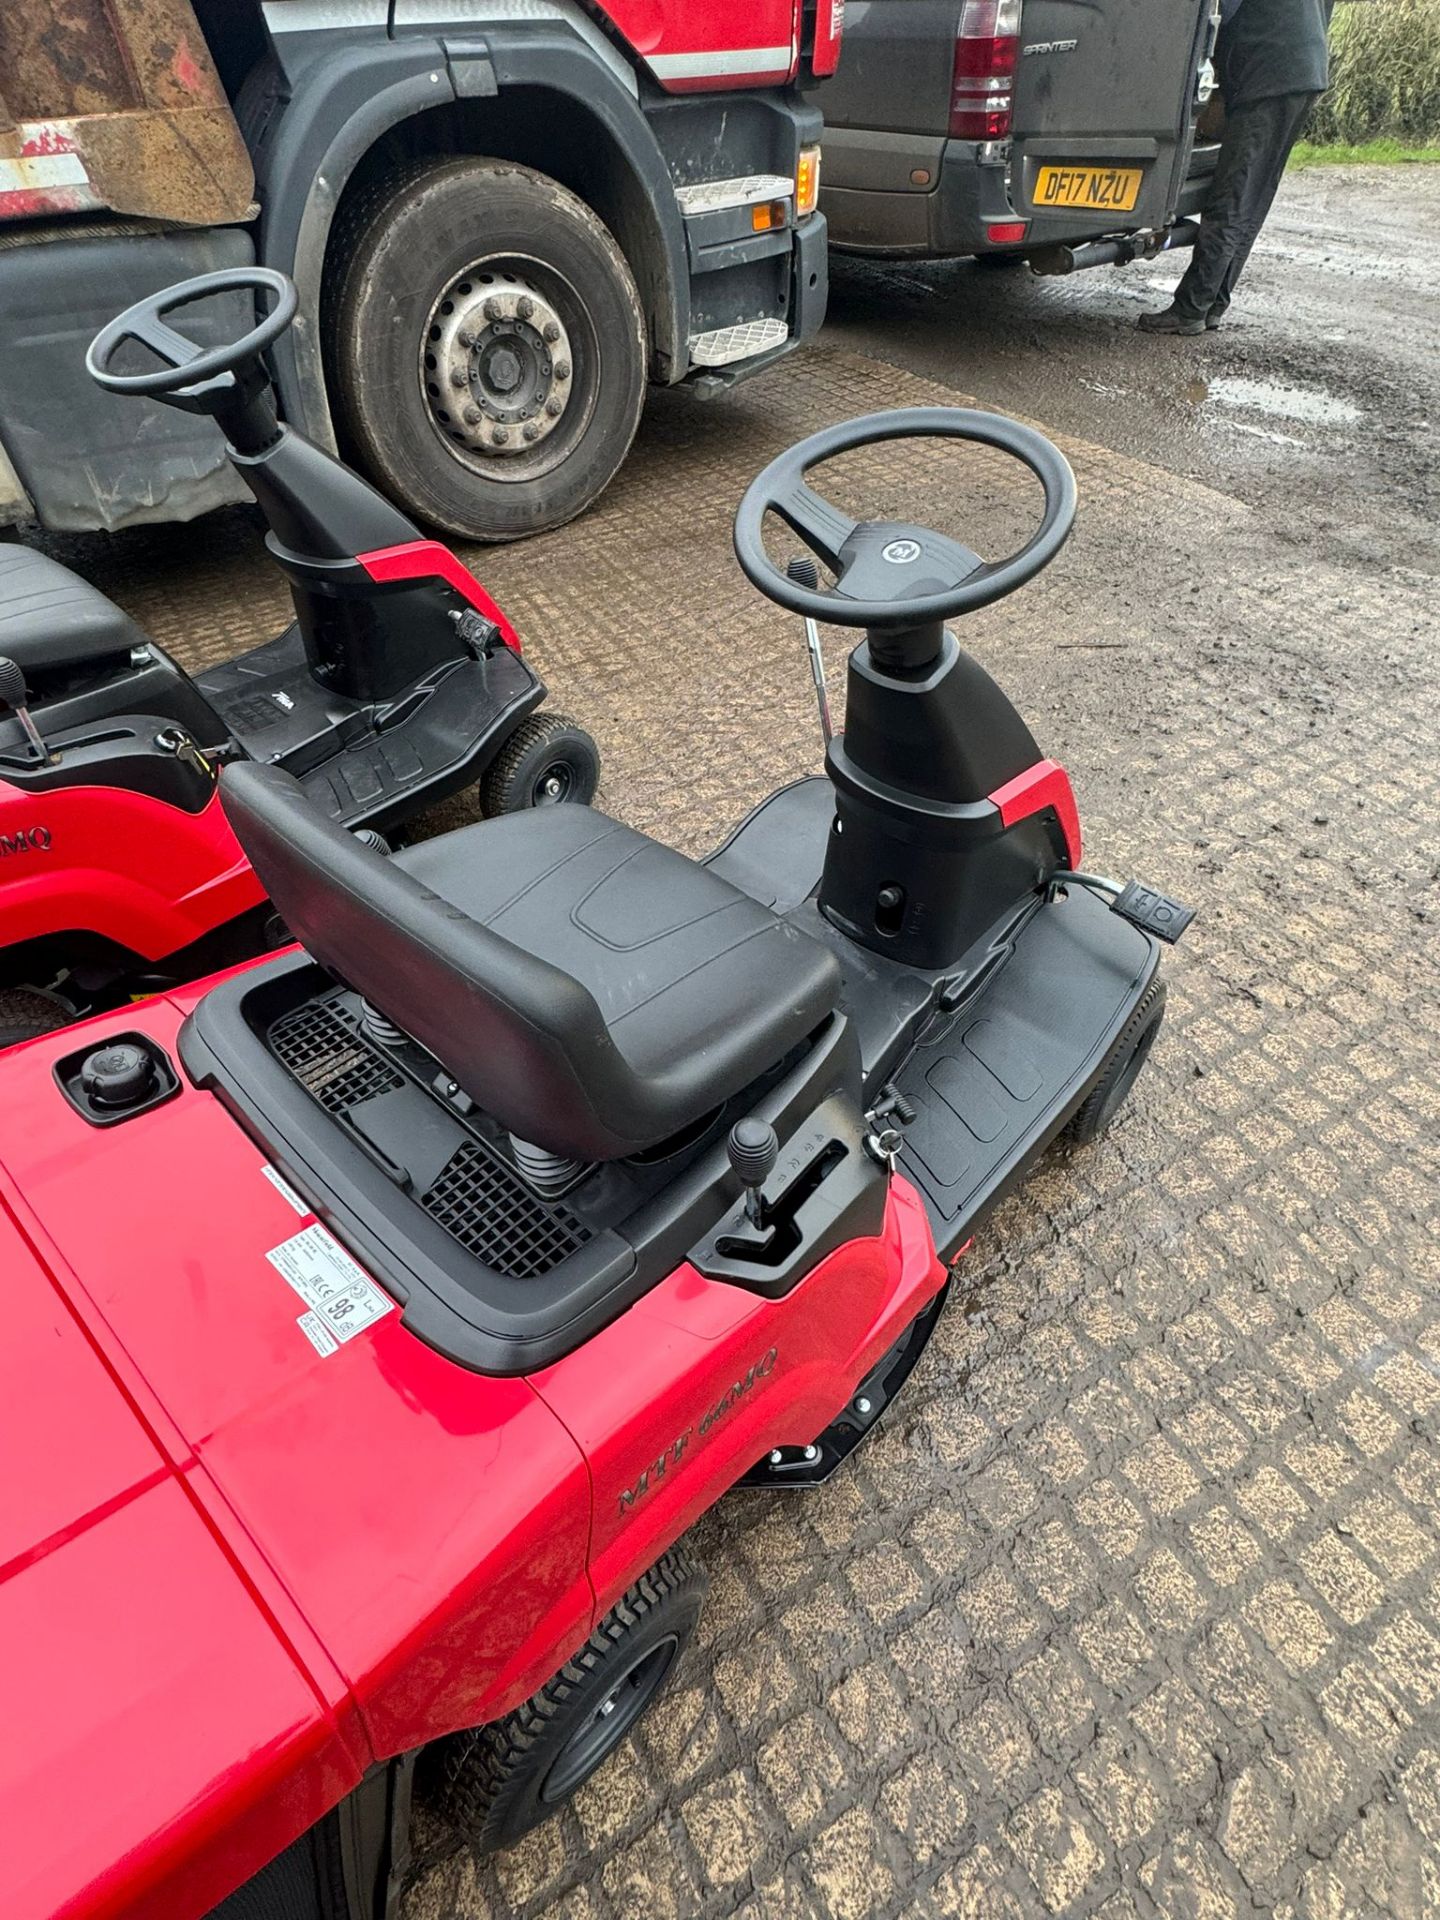 NEW/UNUSED MOUNTFIELD MTF 66 MQ RIDE ON MOWER WITH REAR COLLECTOR *PLUS VAT* - Image 11 of 11